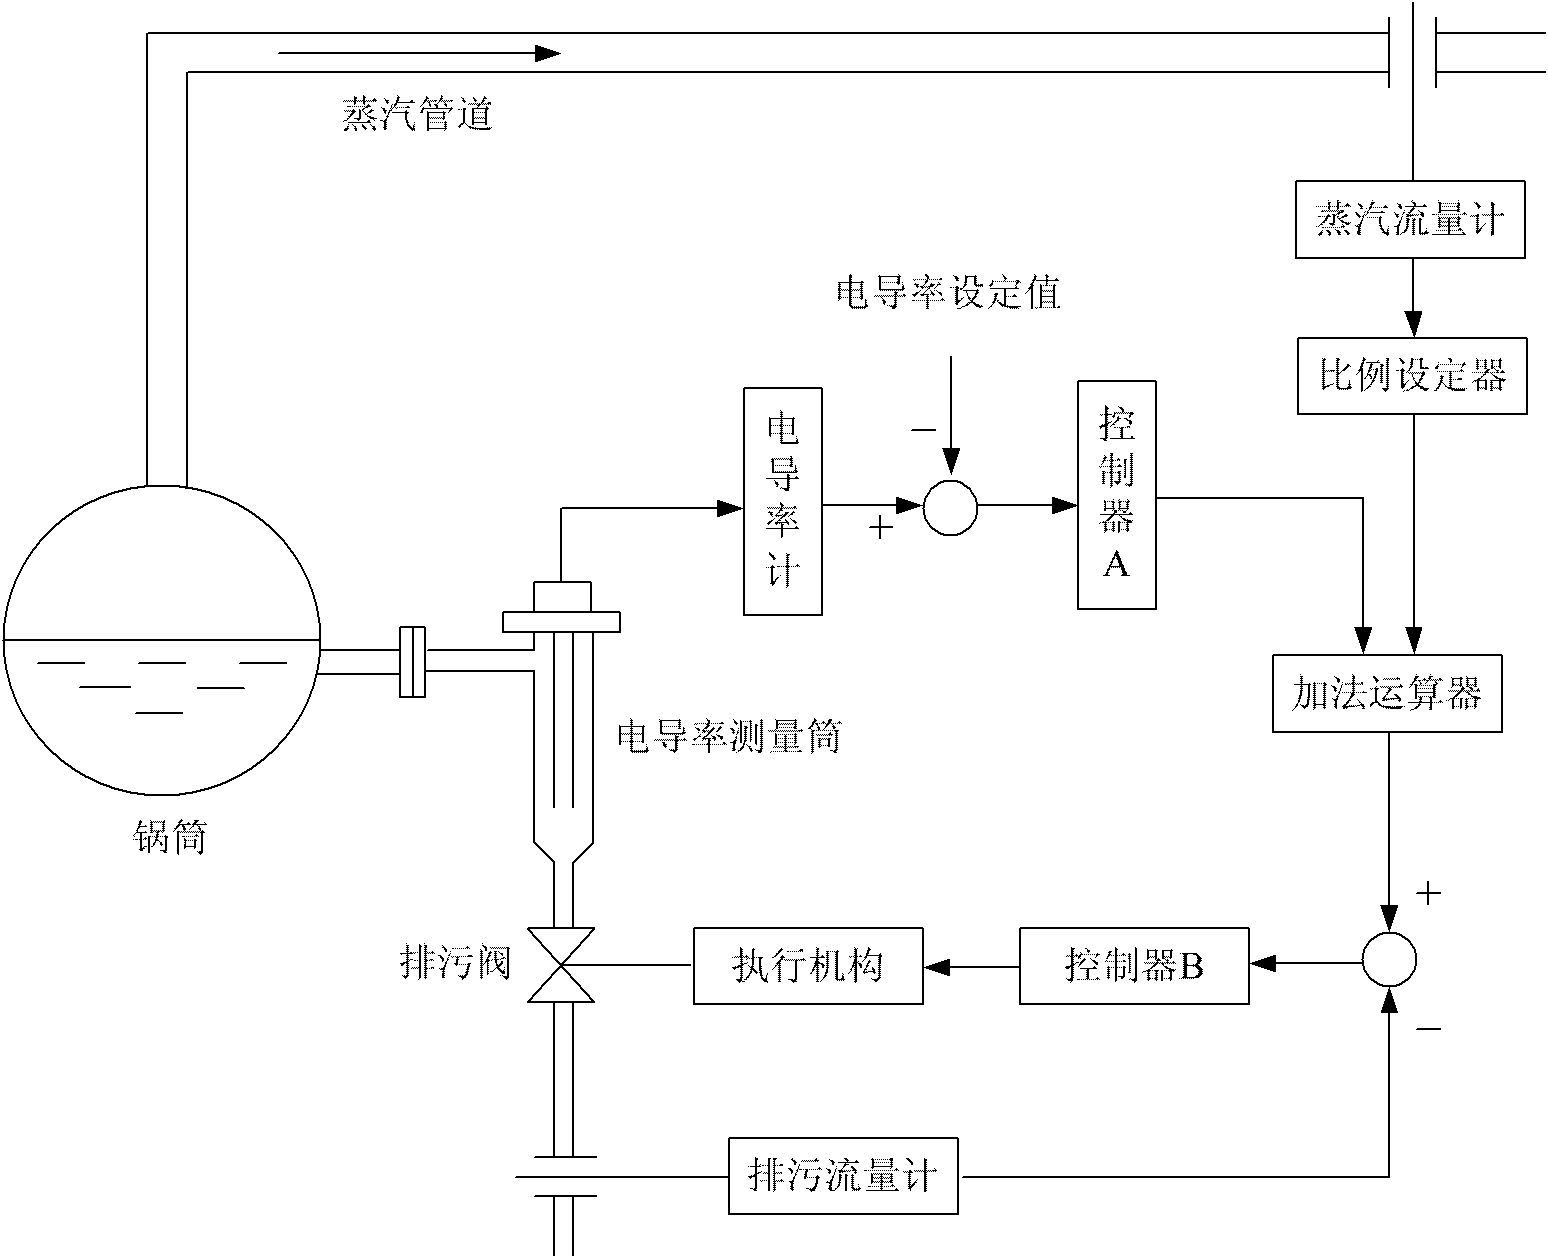 Optimal energy-saving method for controlling surface pollutant discharge of steam boiler